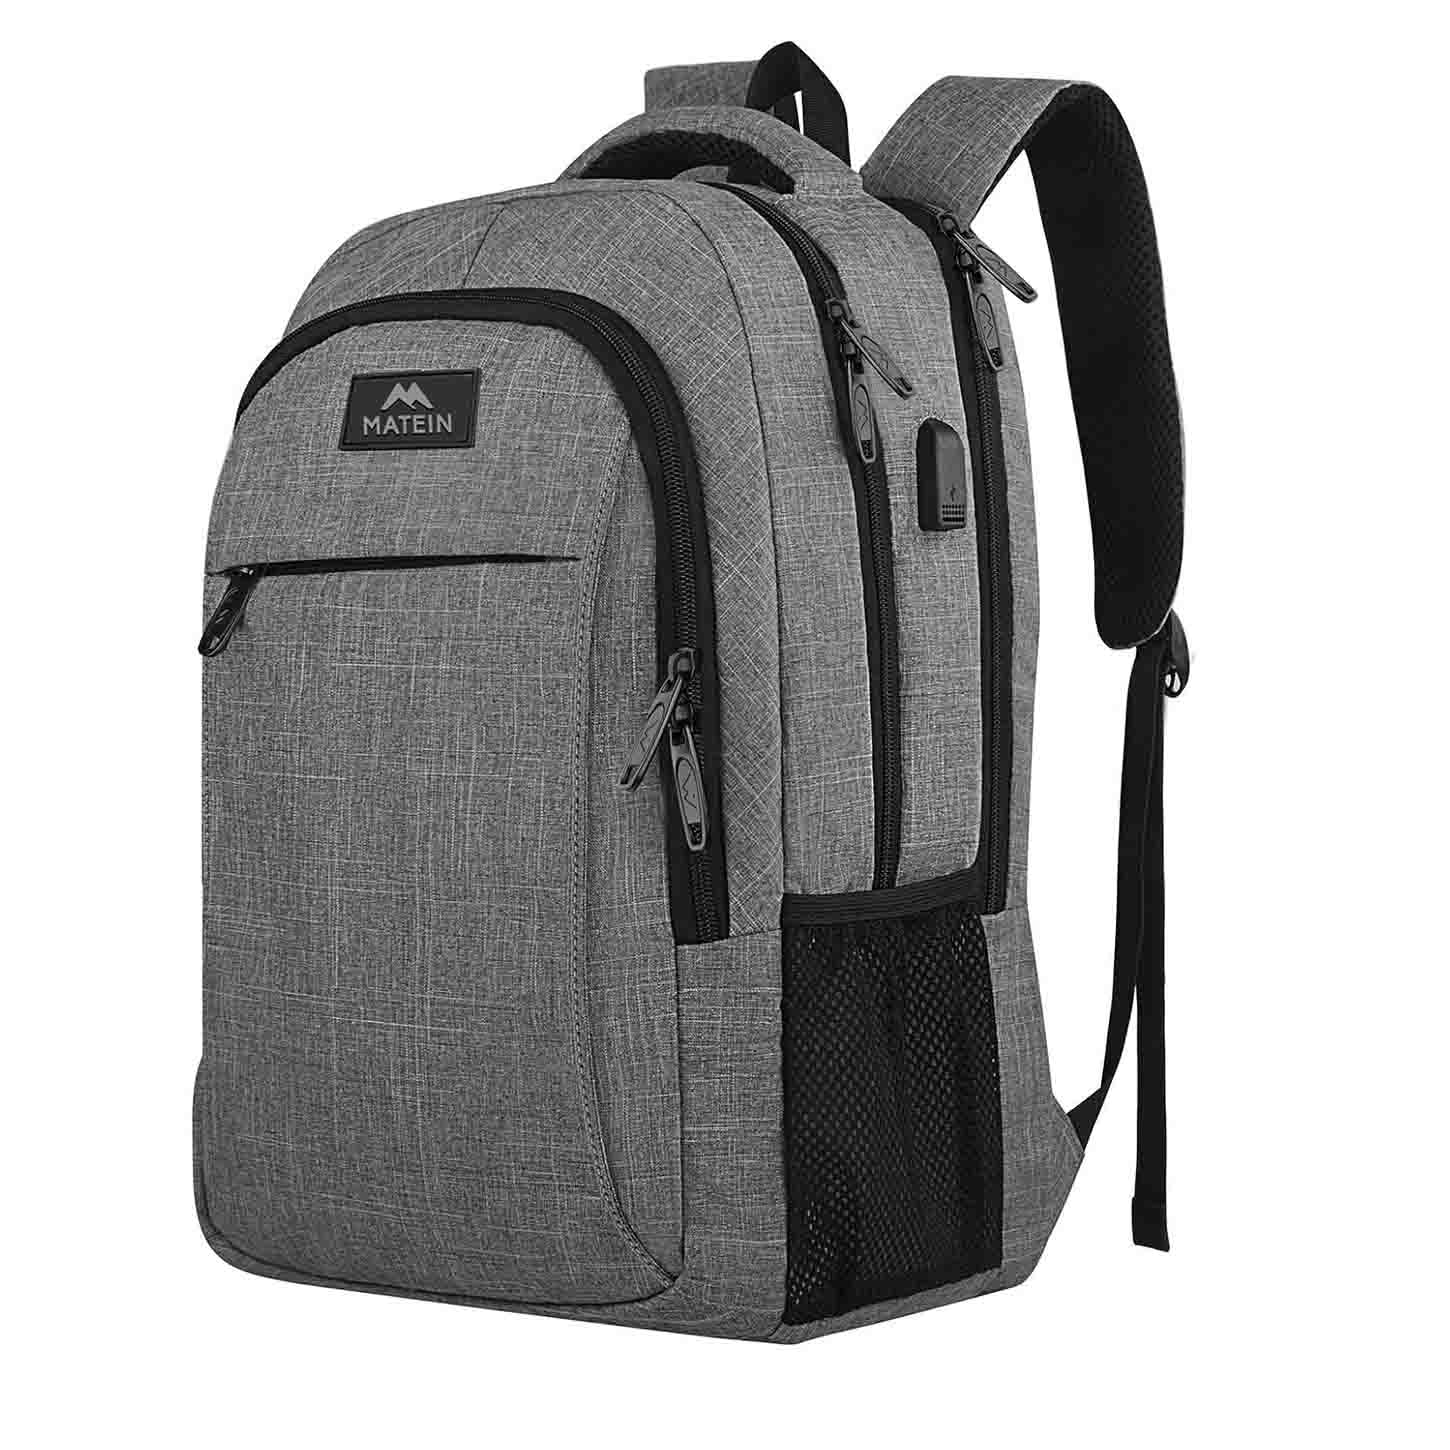 grey and black travel backpack with zip and side pockets